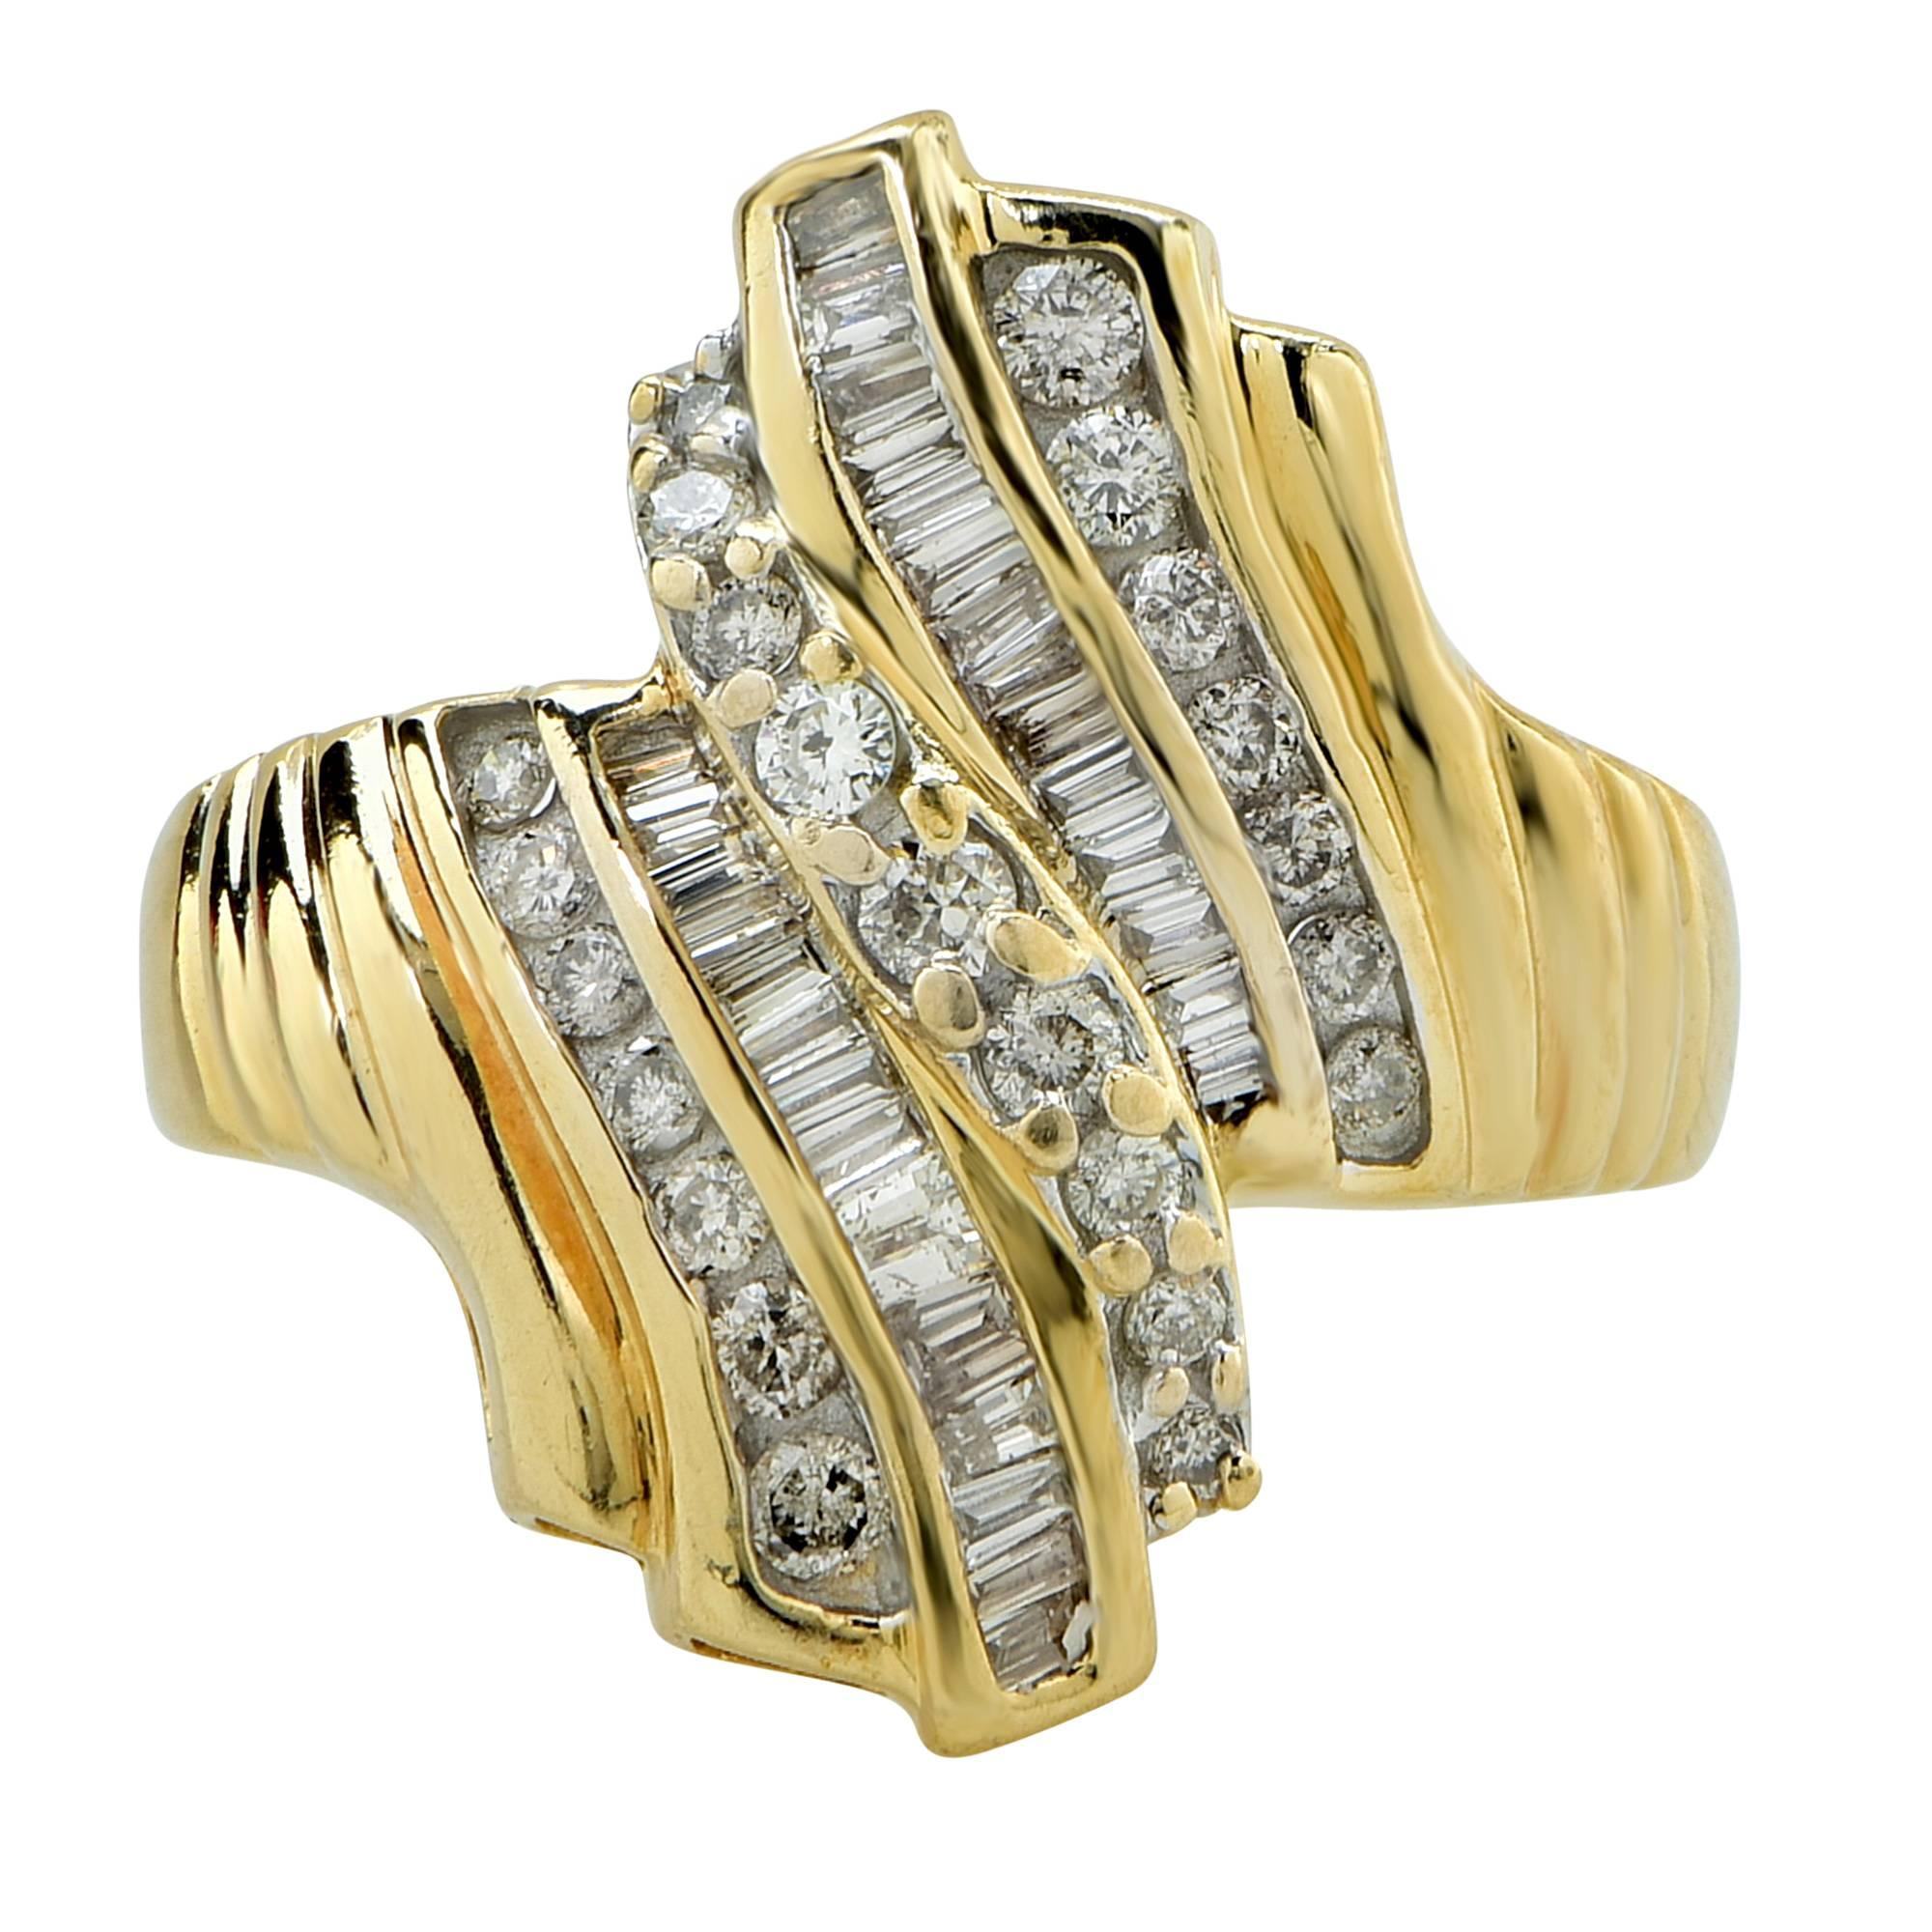 14k yellow gold ring featuring 51 round brilliant and tapered baguette cut diamonds weighing approximately 1ct total, H color SI clarity.

The ring is a size 9 and can be sized up or down.
It is stamped and tested as 14k gold.
The metal weight